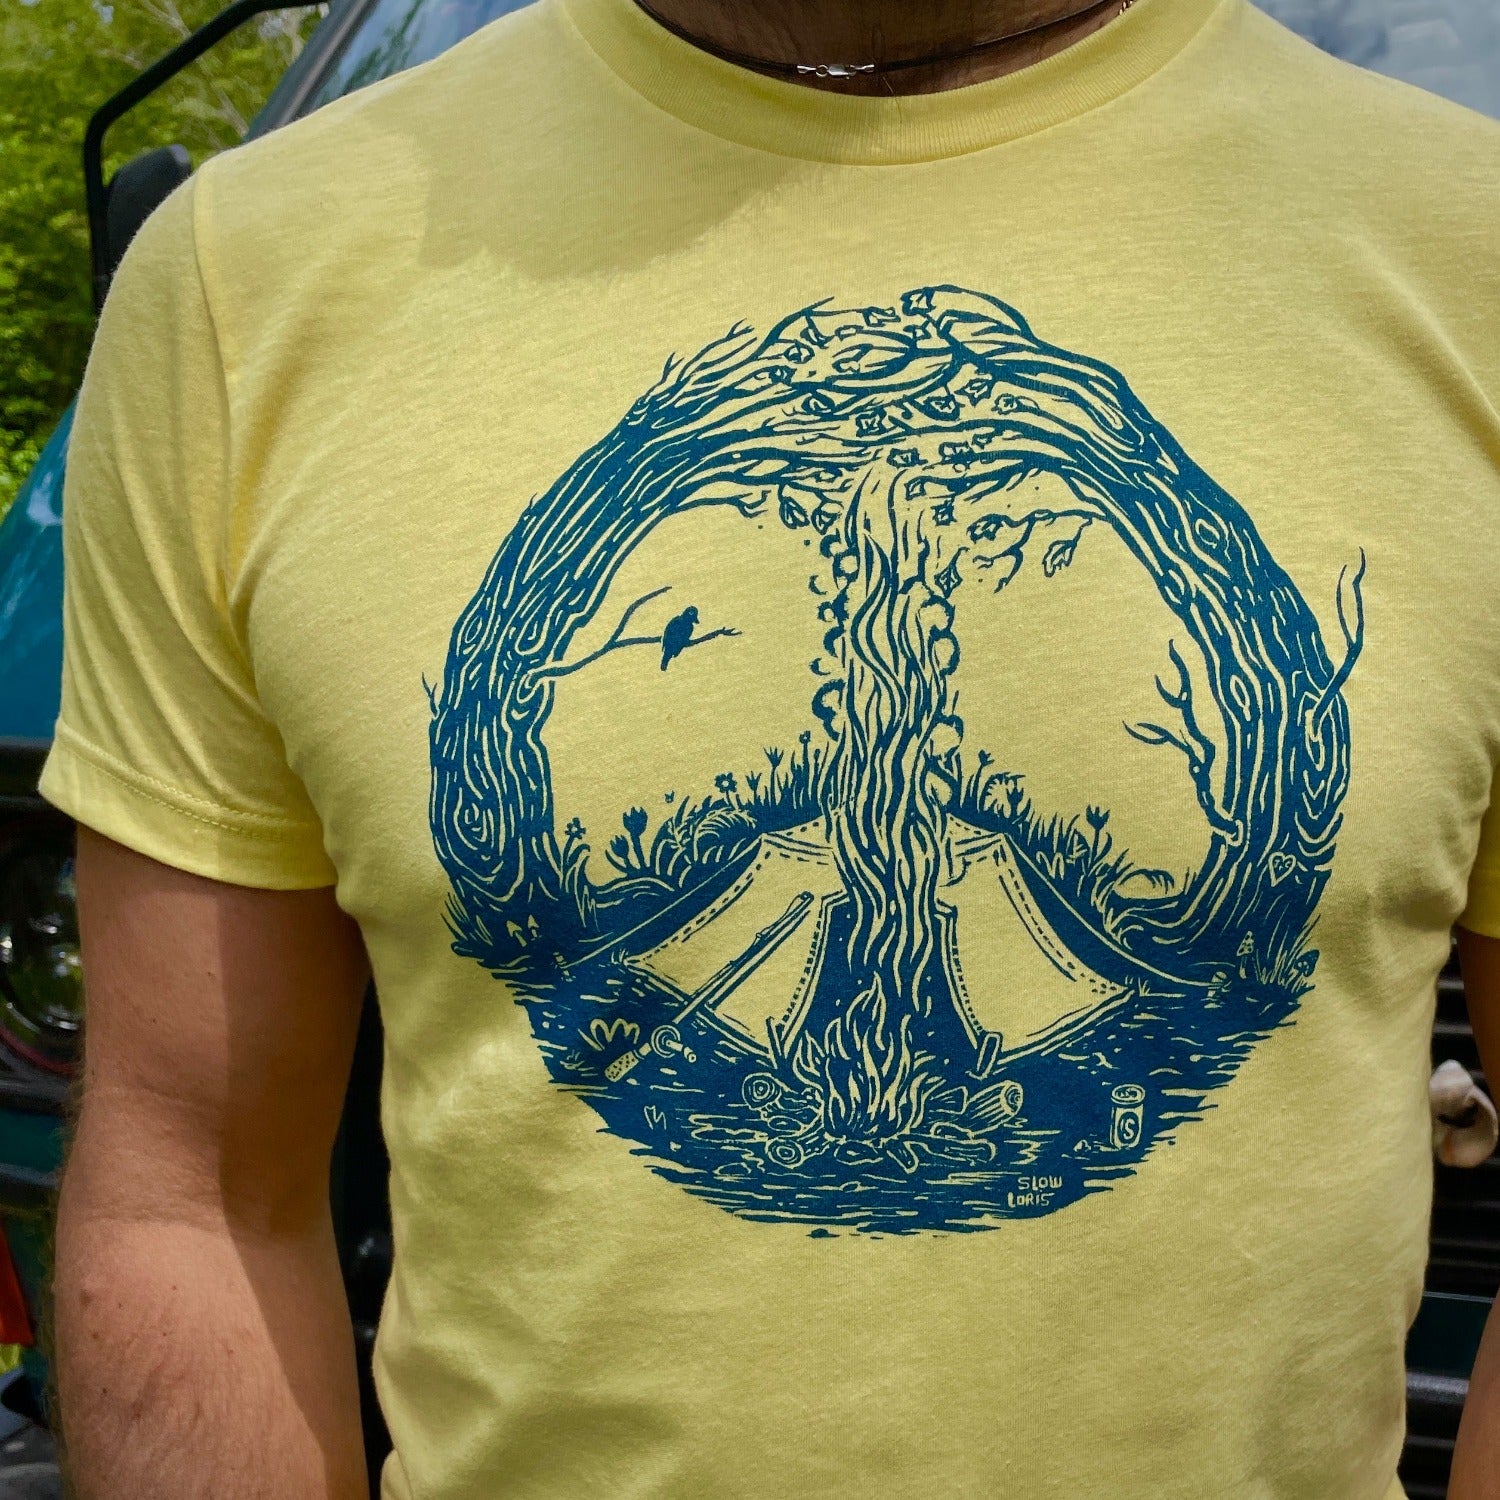 Close up of blue print on a yellow T. Print is of a campfire's smoke going up the center meeting with the tops of curved in trees creating a peace sign. Tent is by the fire and a bird is on a branch